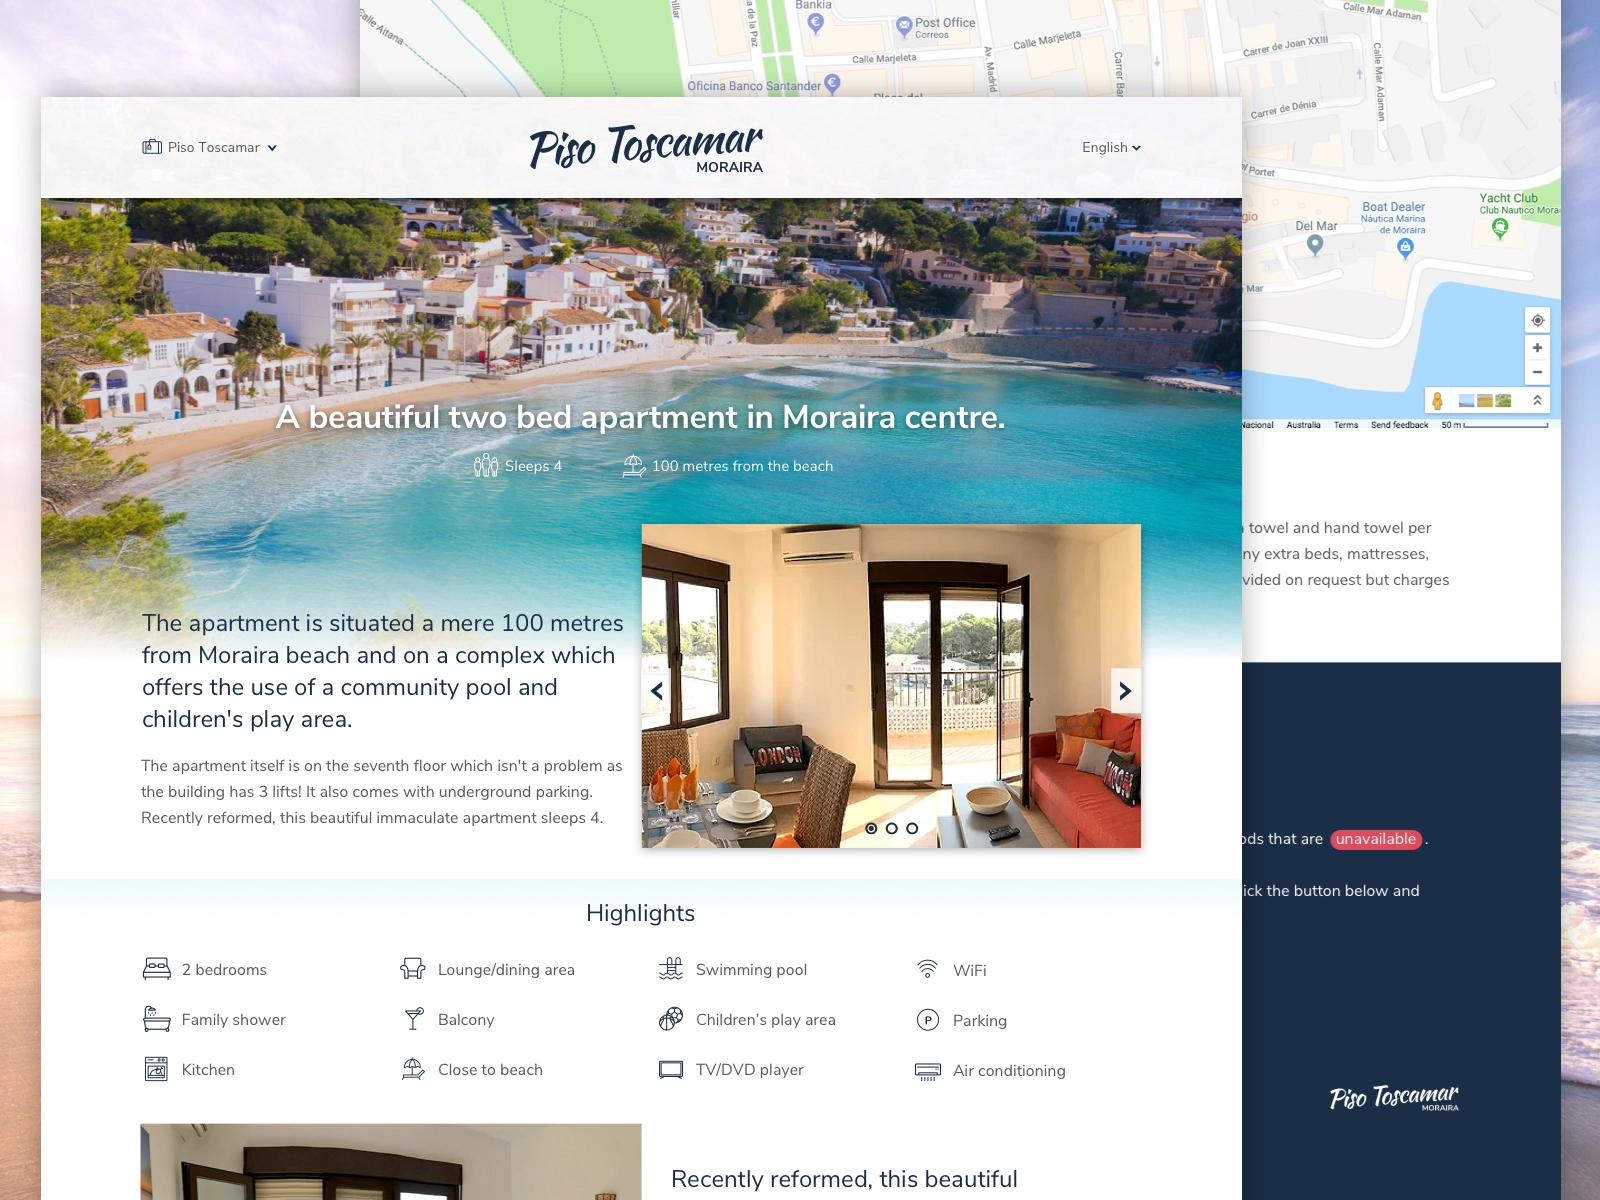 Design for a holiday rental website in Moraira, Spain